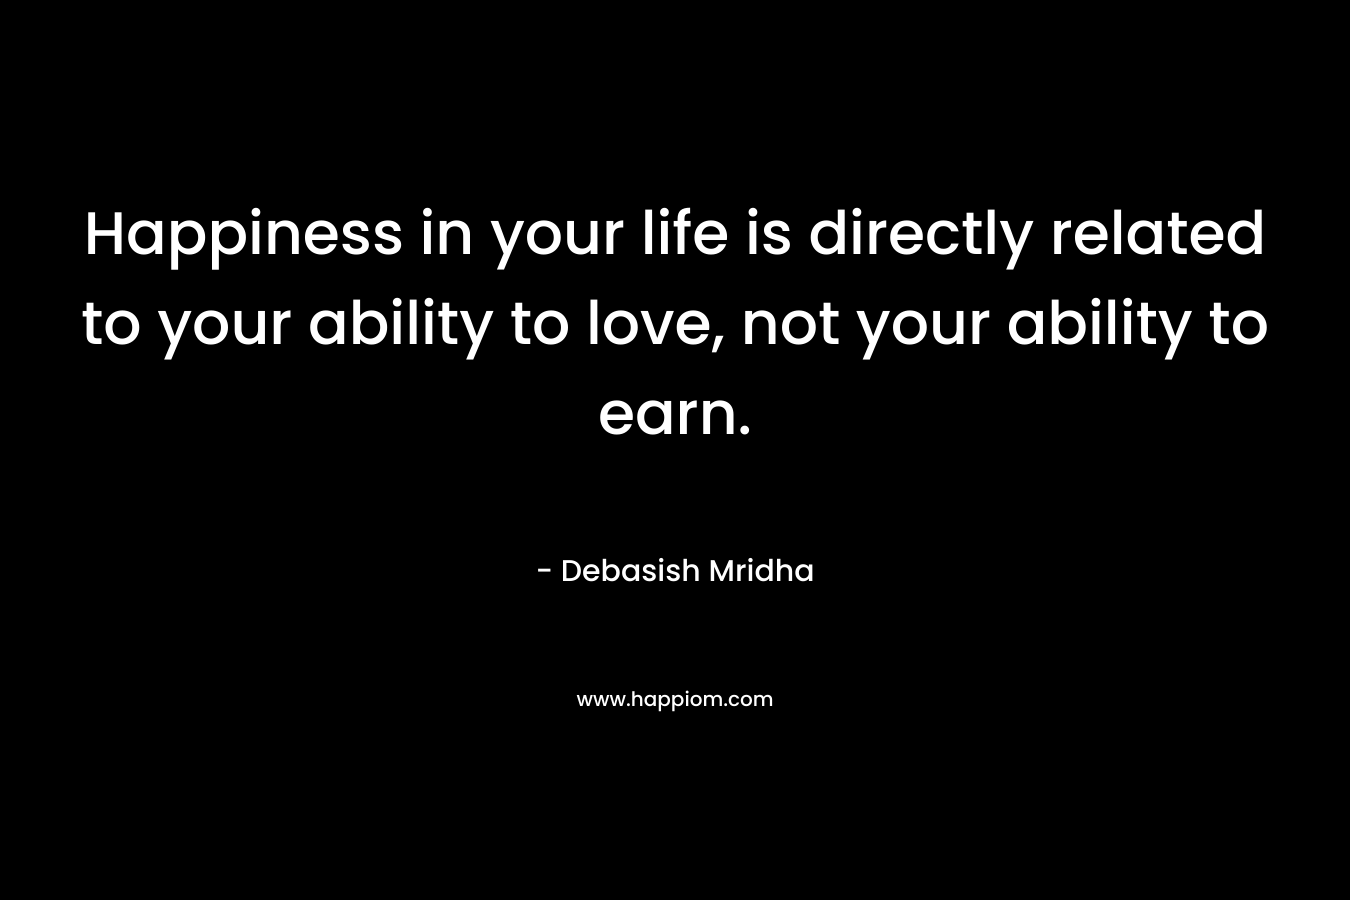 Happiness in your life is directly related to your ability to love, not your ability to earn.